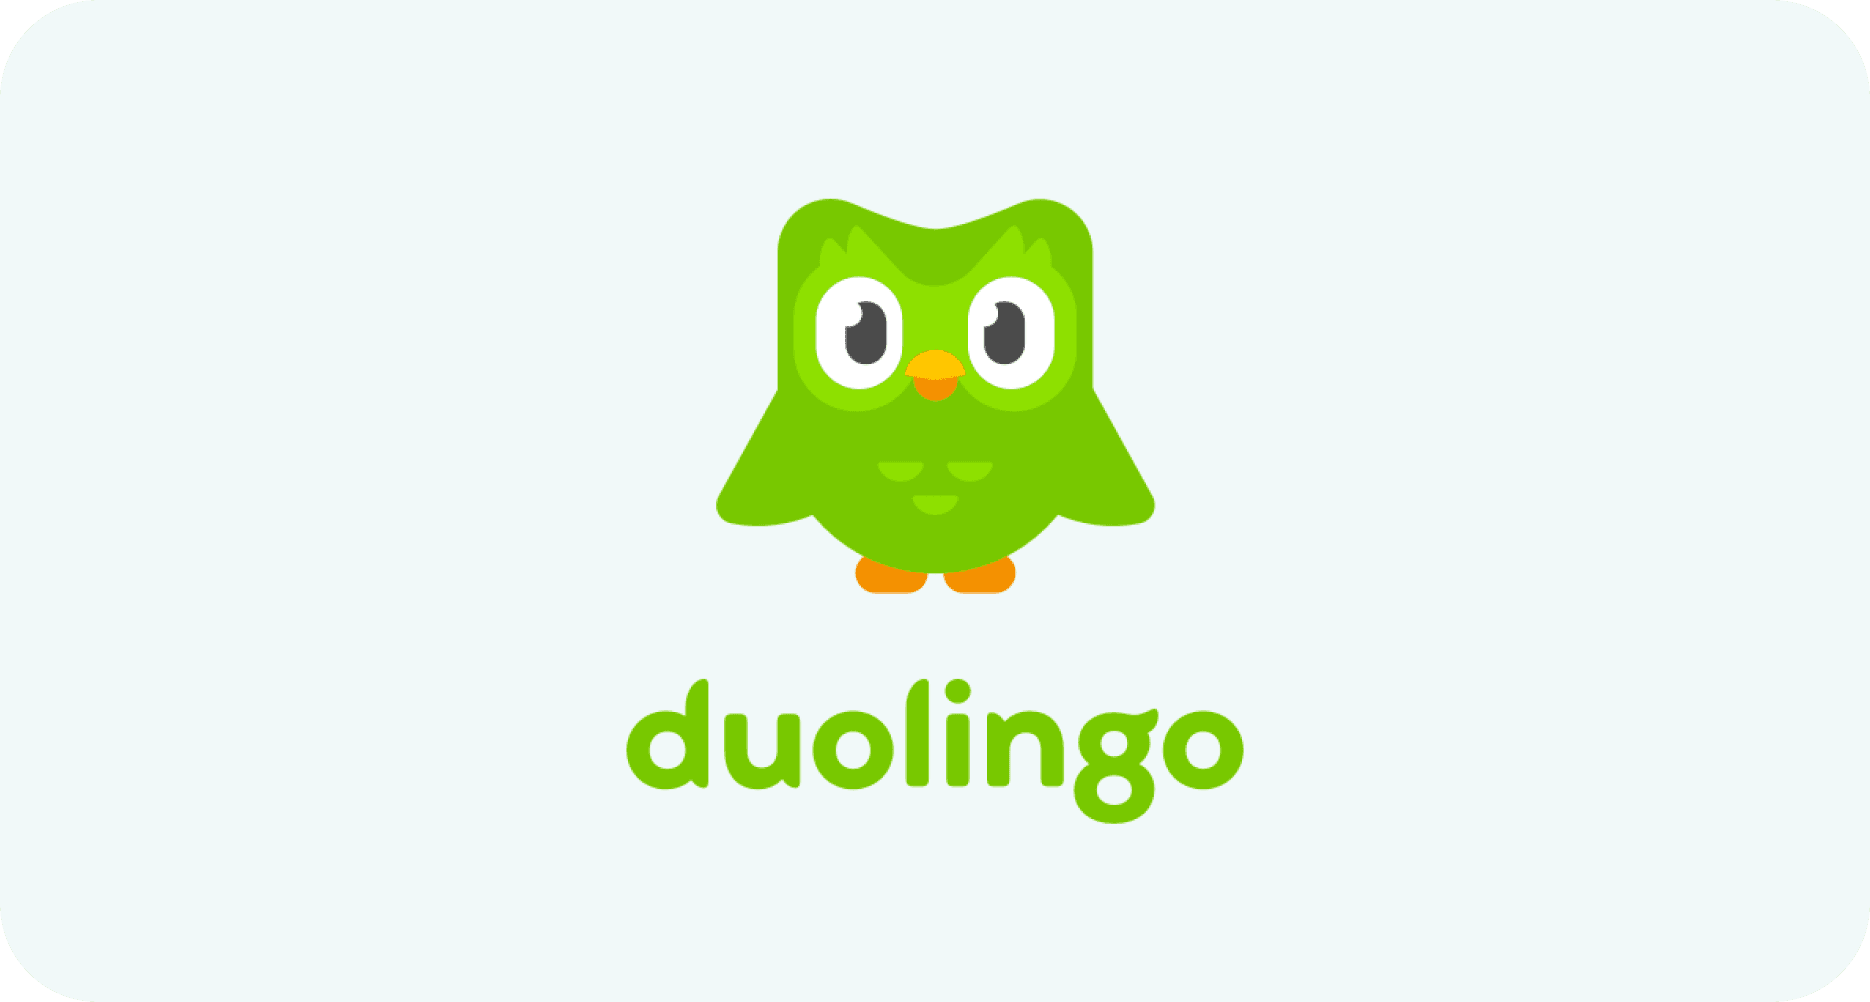 Duolingo Logo as an app that features adaptive learning